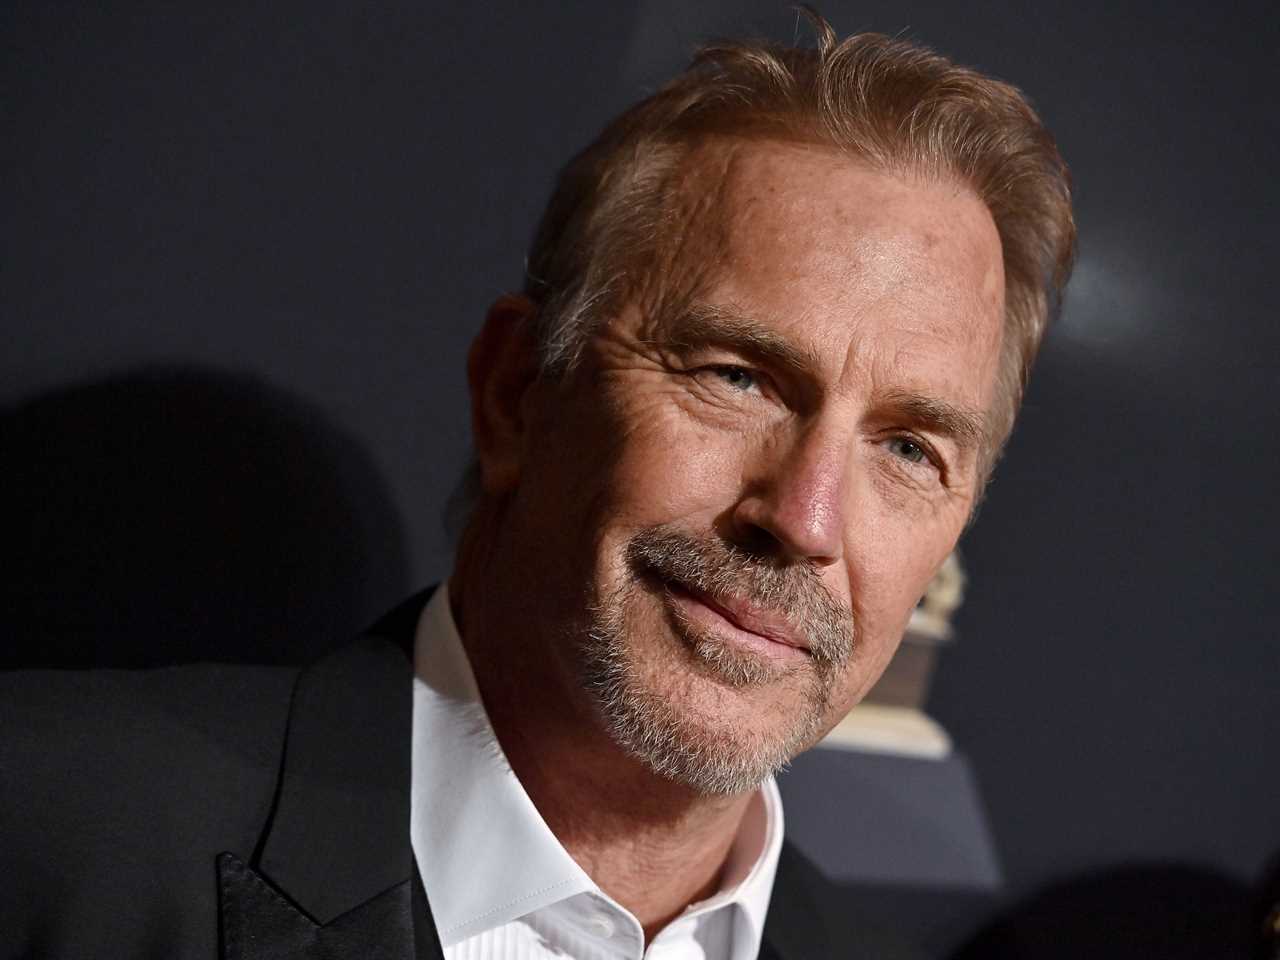 ‘Yellowstone’ has made Kevin Costner the most well-paid actor on television. Here’s how he makes and spends his millions.